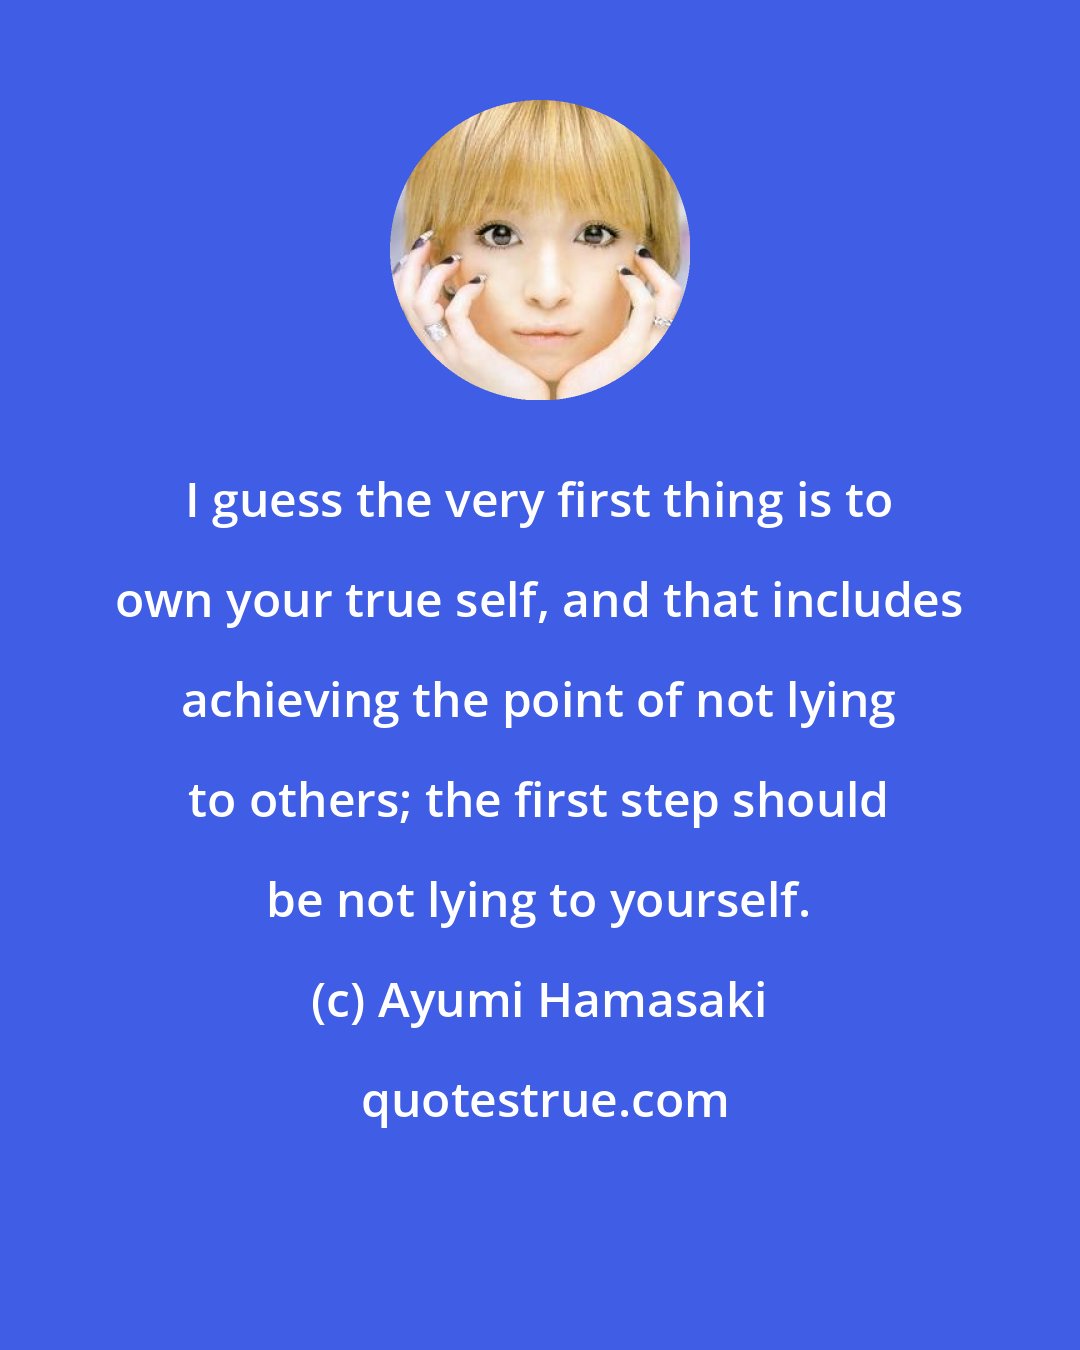 Ayumi Hamasaki: I guess the very first thing is to own your true self, and that includes achieving the point of not lying to others; the first step should be not lying to yourself.